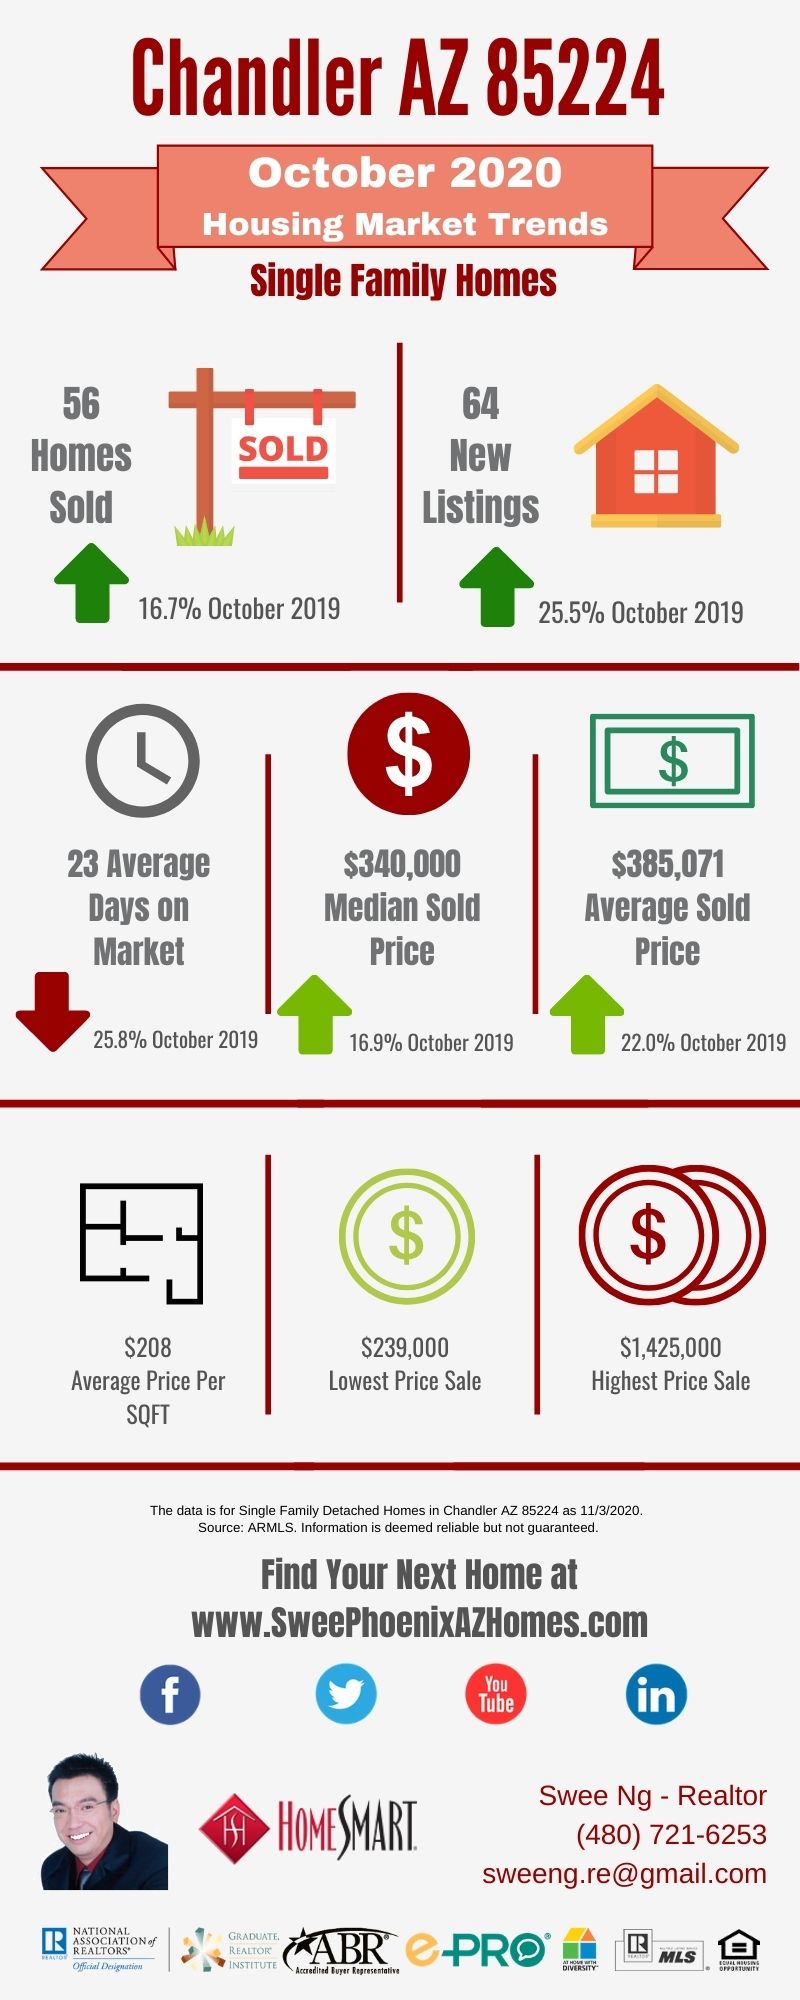 Chandler AZ 85224 Housing Market Trends Report October 2020, House Value, Real Estate and Statistic by Swee Ng